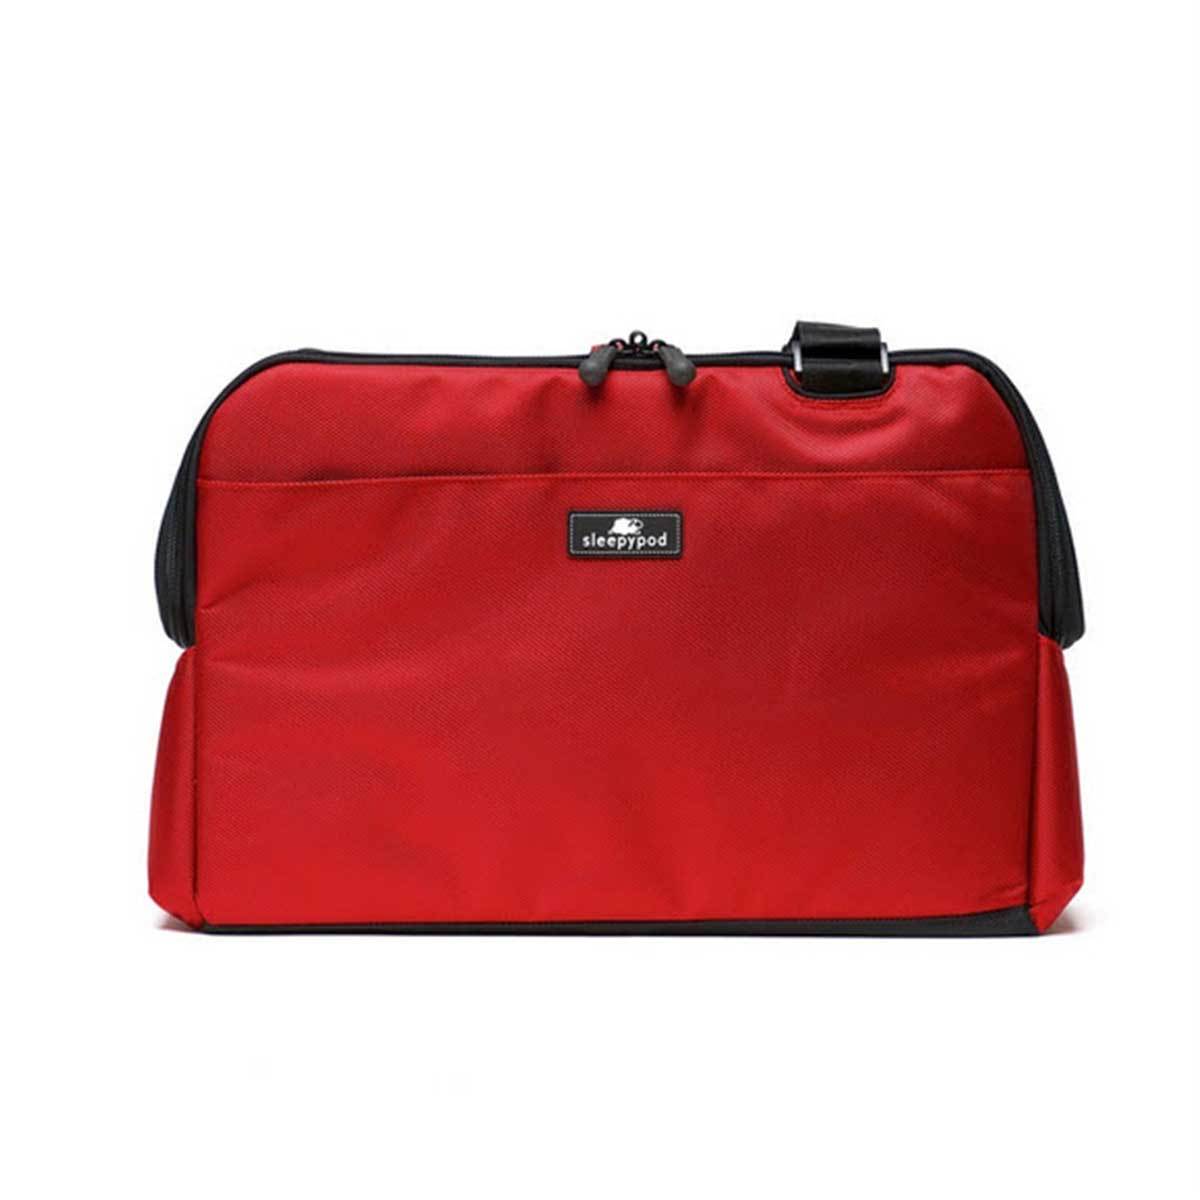 Sleepypod Atom Pet Carrier in Strawberry Red | Pawlicious & Company